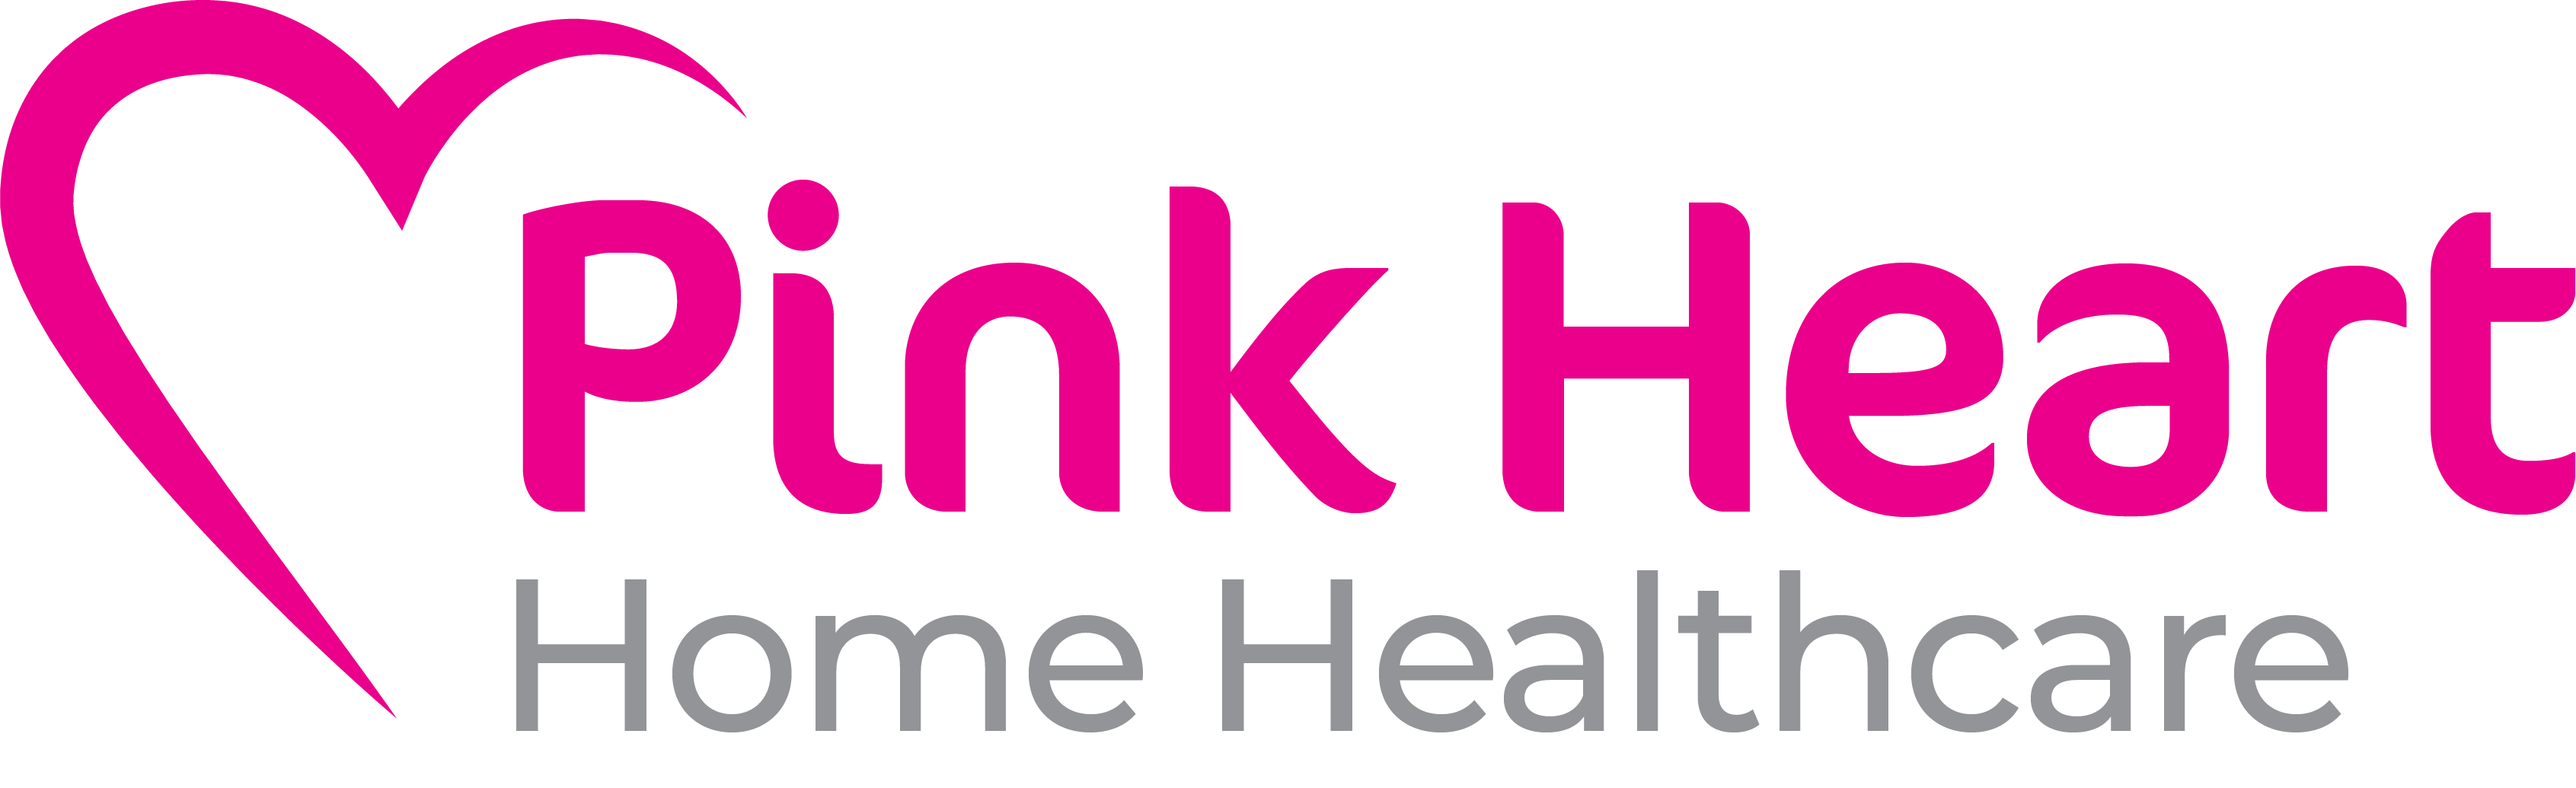 Pink Heart Home Healthcare